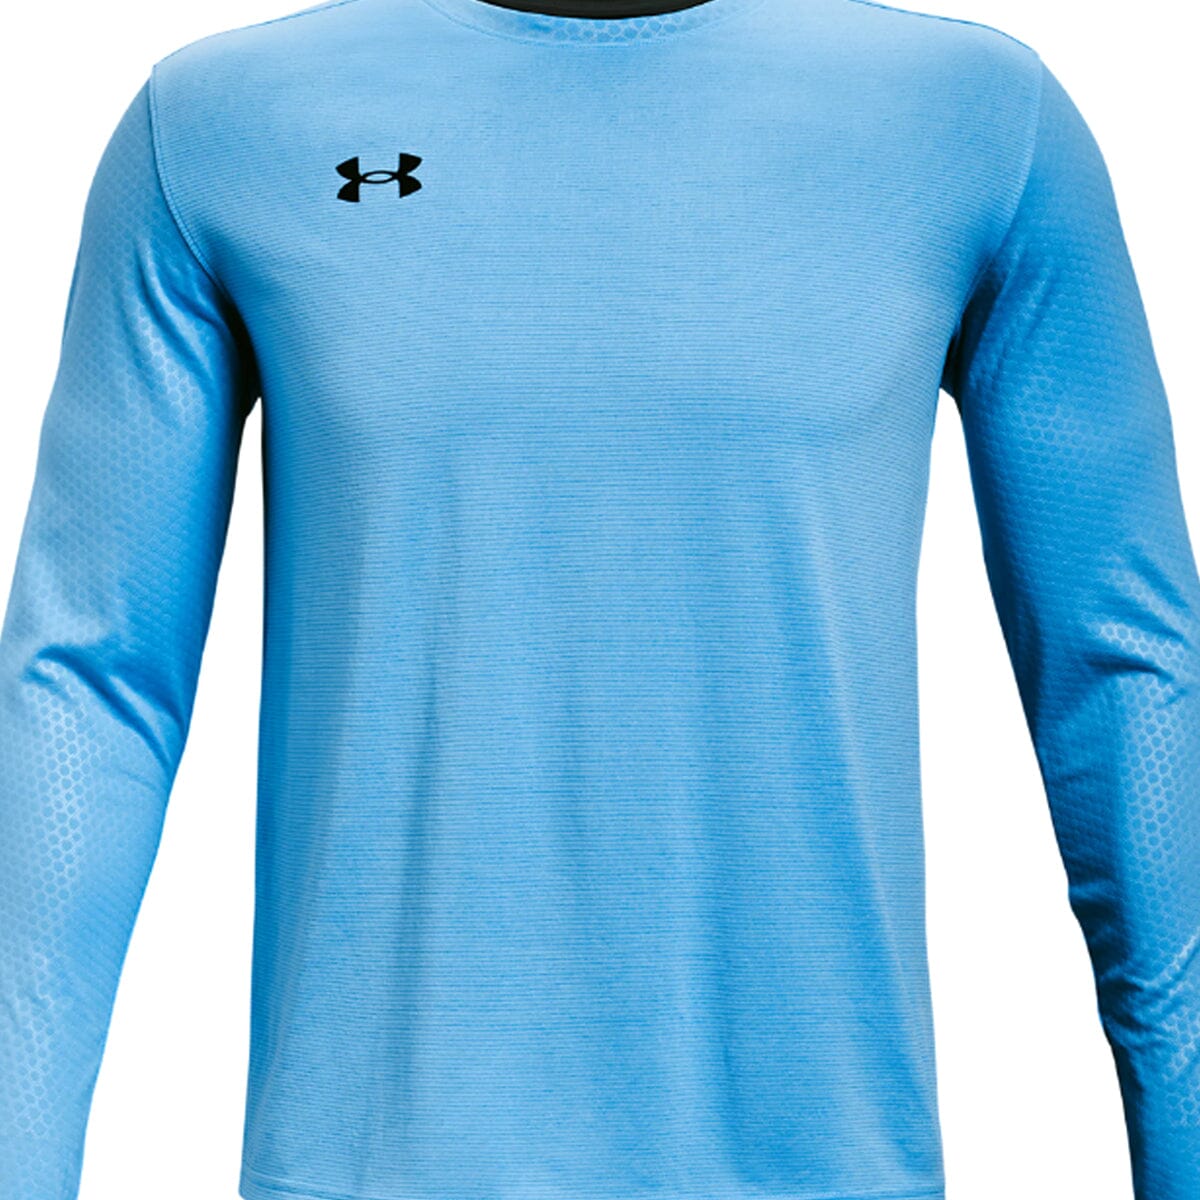 Under Armour Youth UA Wall Goalkeeper Jersey |1364967 Jersey Under Armour Youth Medium Carolina Blue / Black 